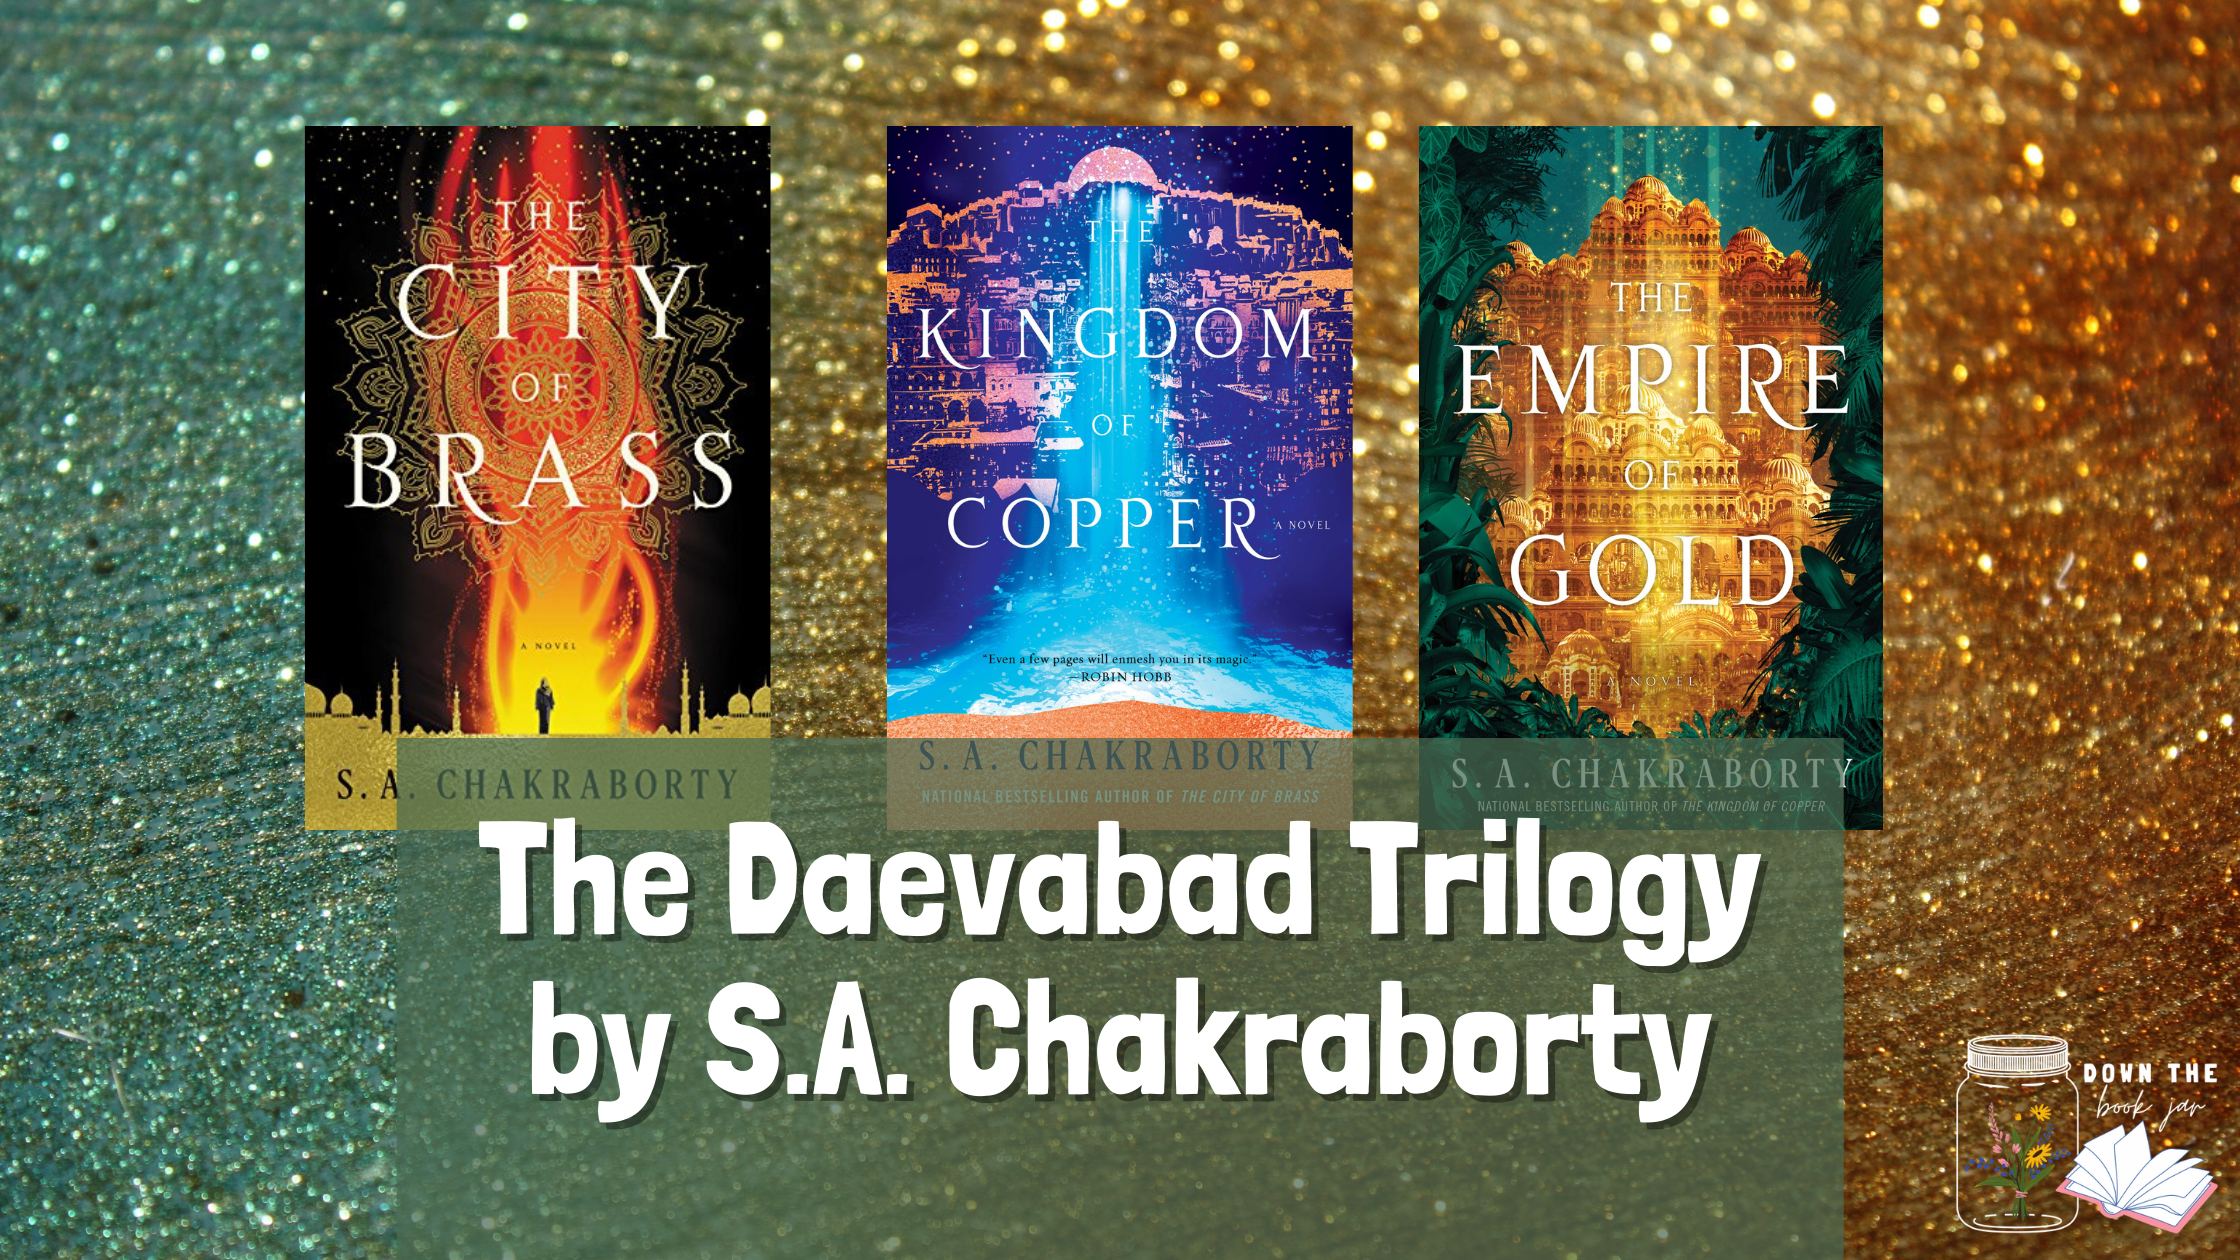 The Daevabad Trilogy by S.A. Chakraborty